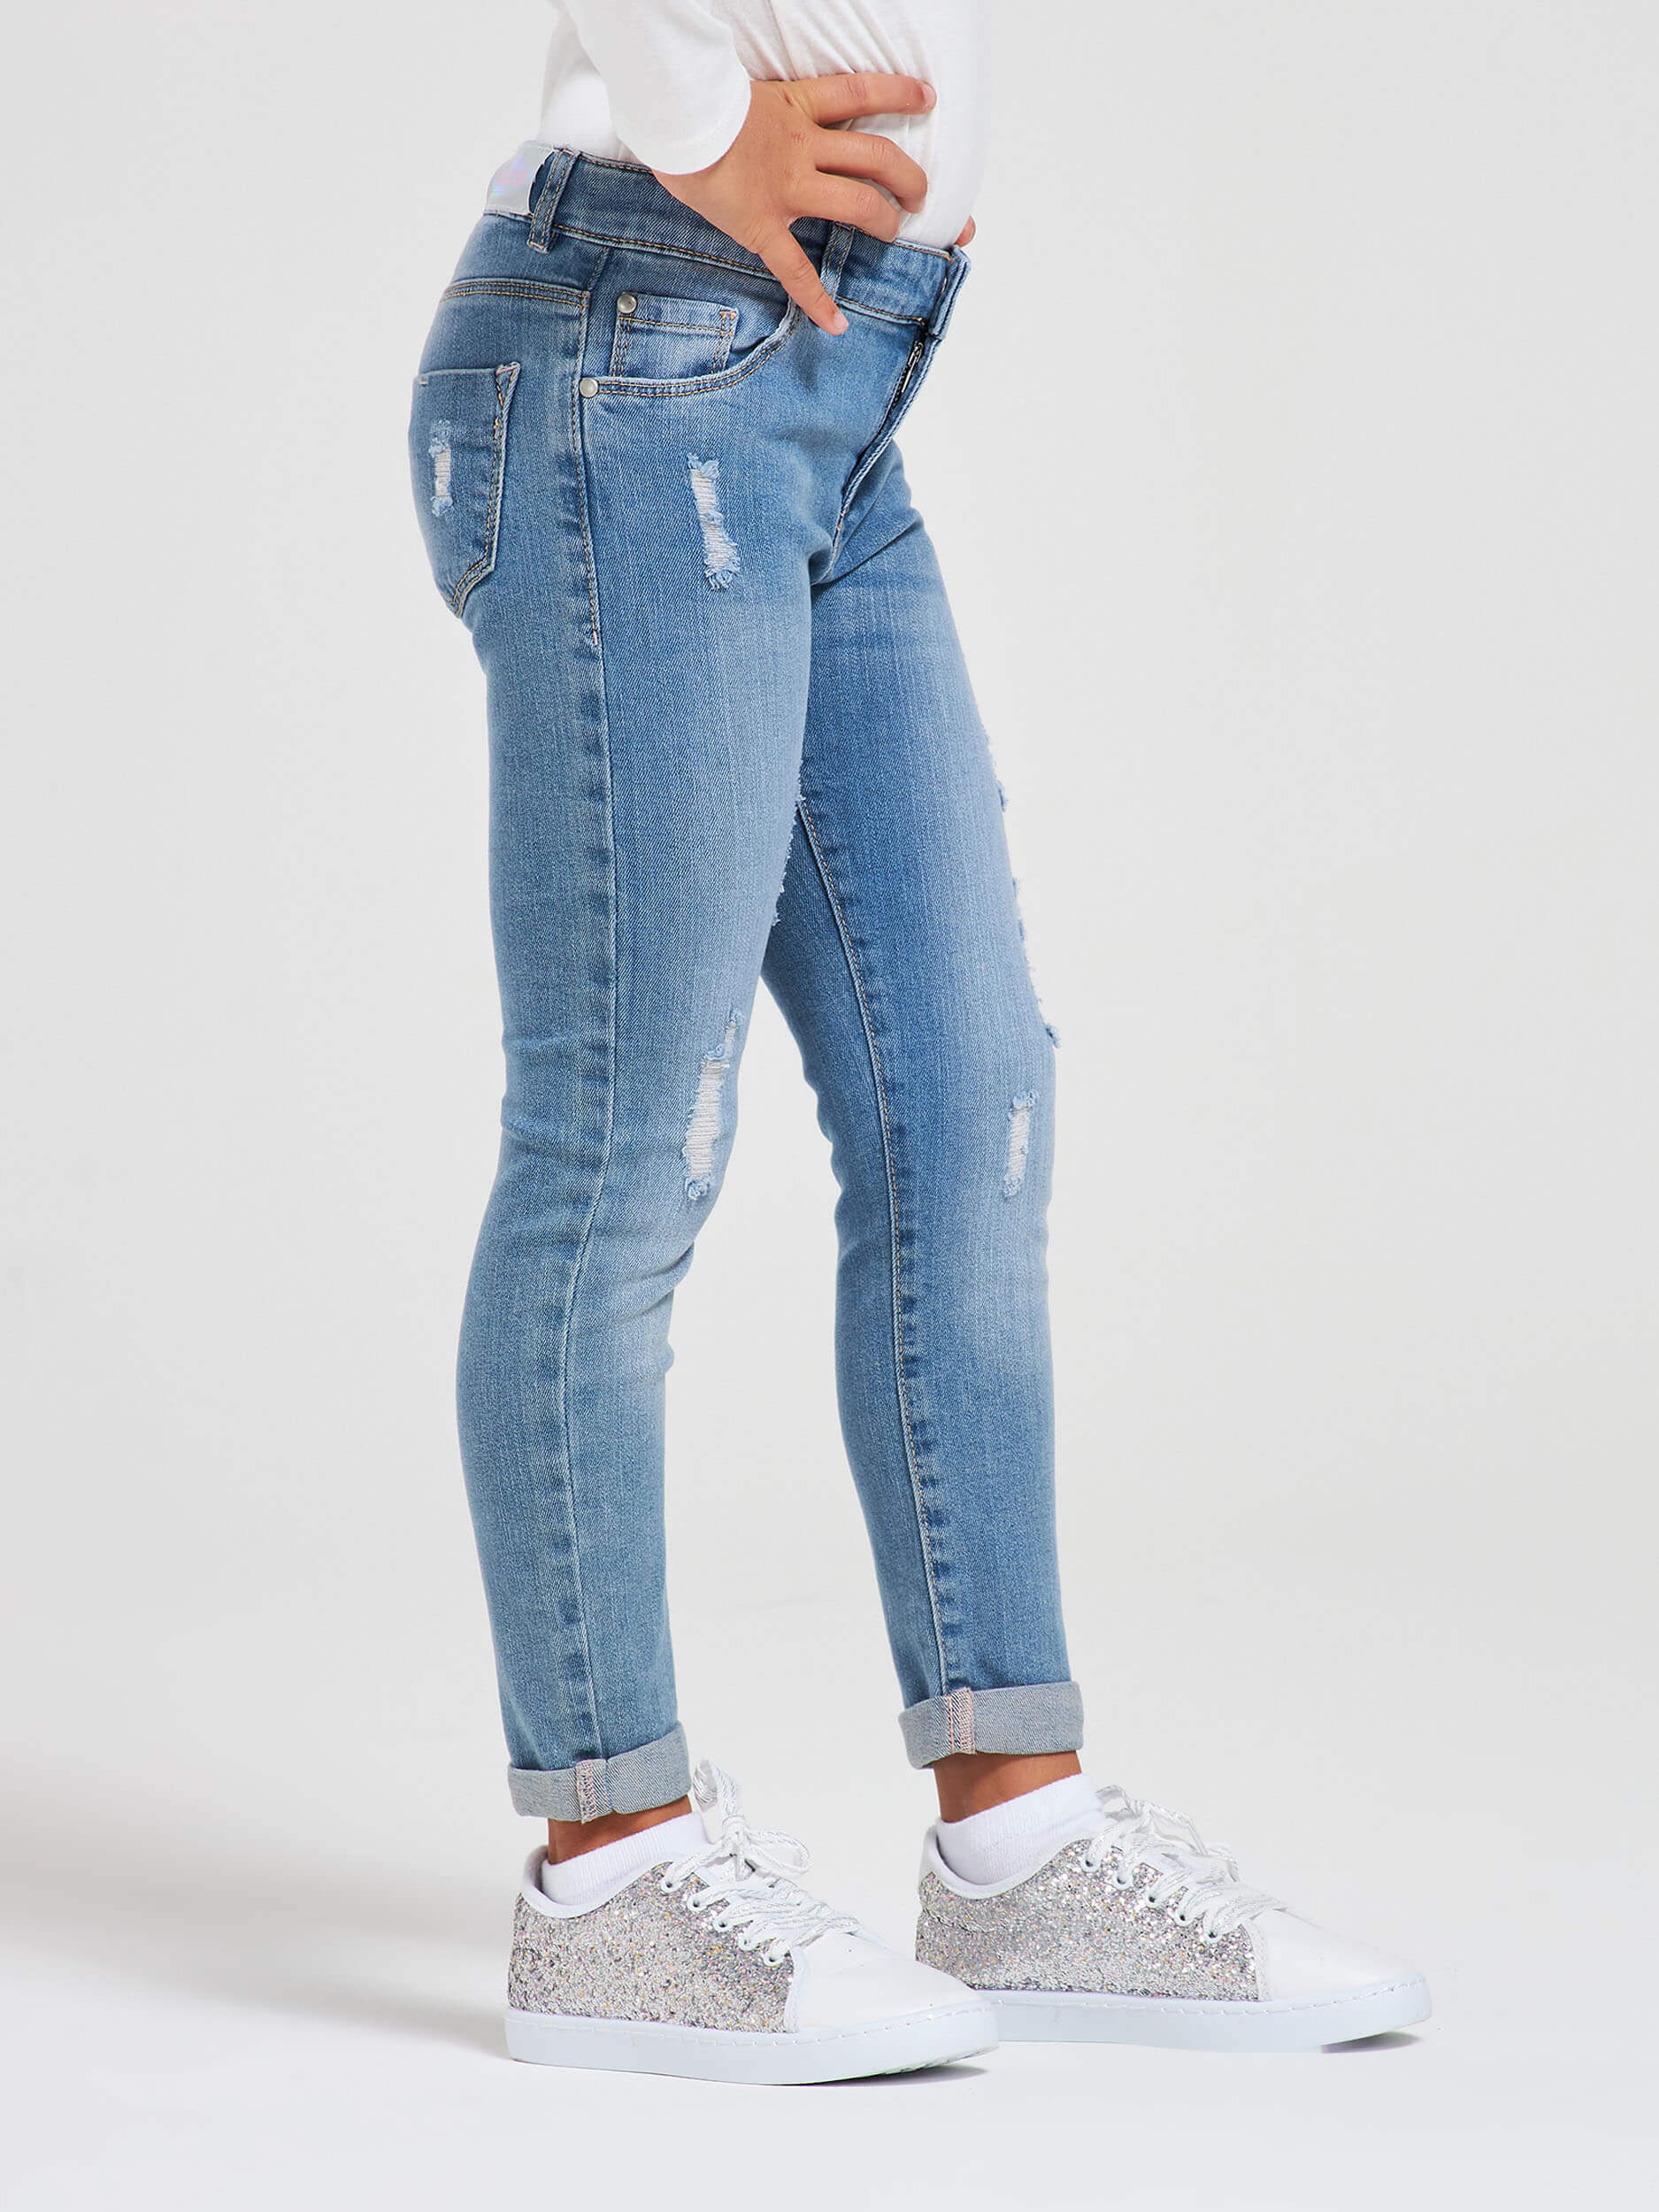 buy ripped jeans online